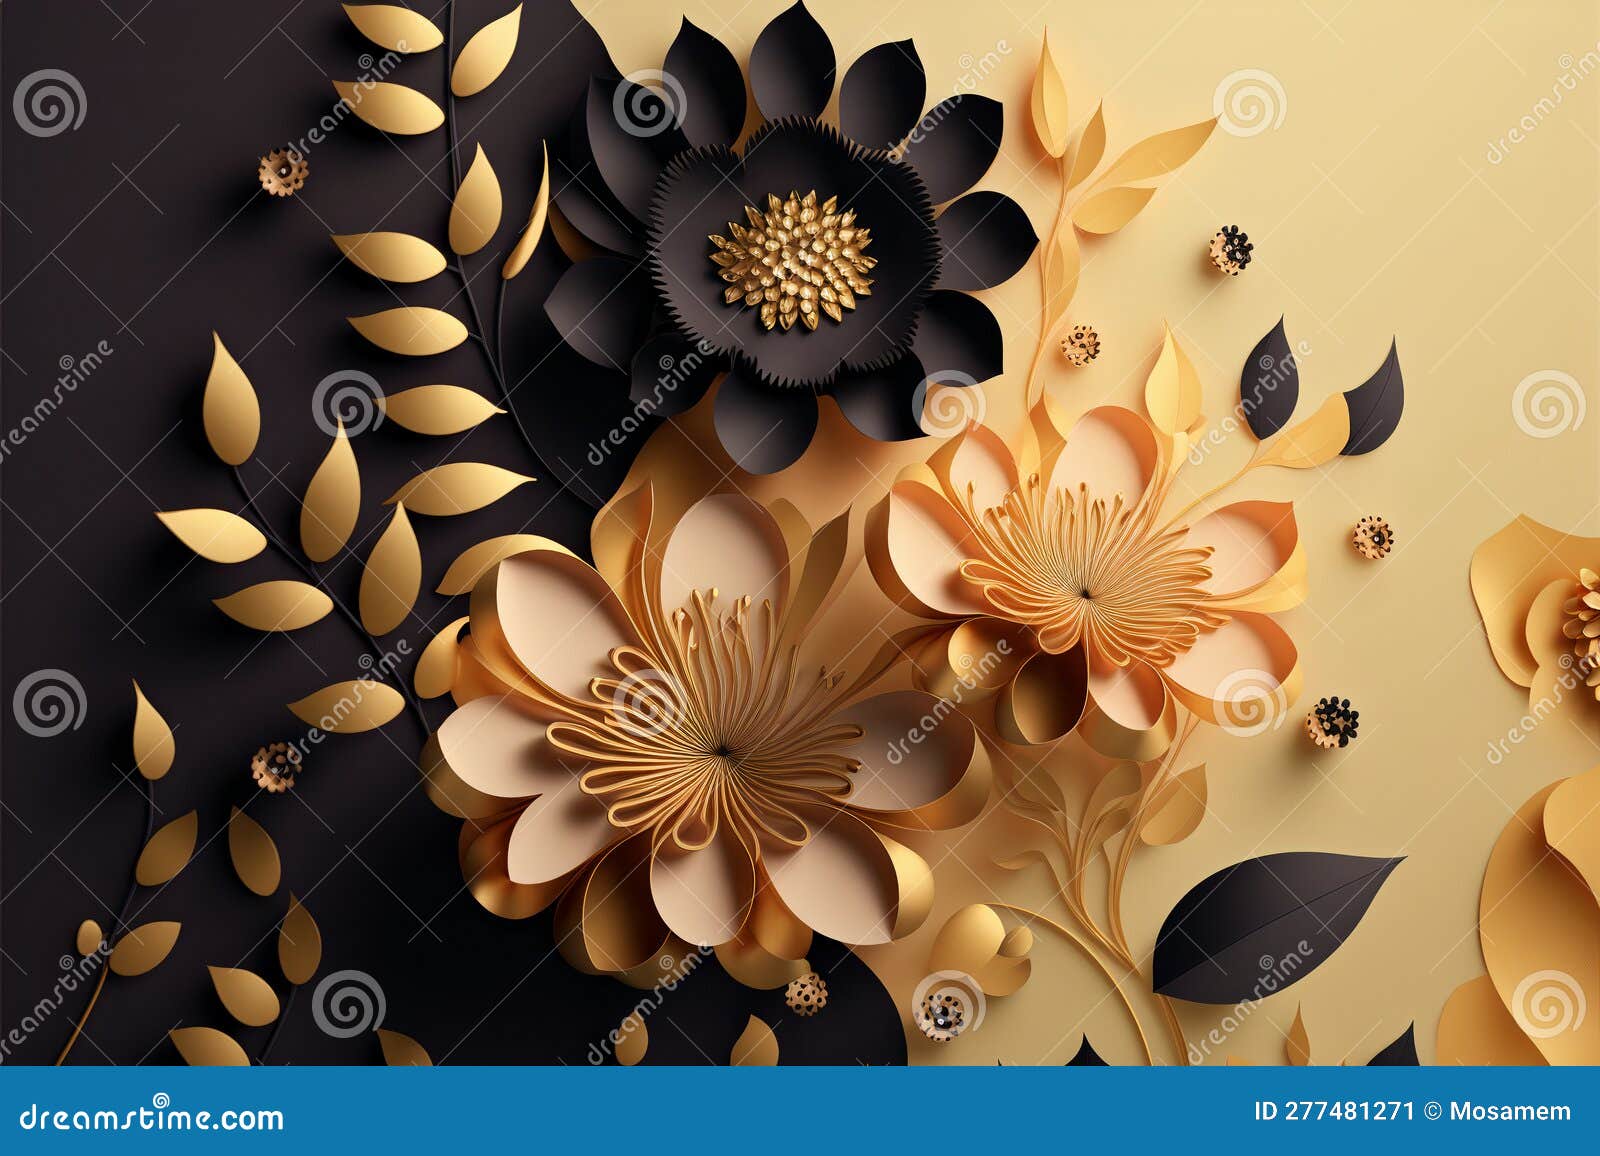 3d Colorful Floral Craft Wallpaper. Orange, Rose, Green, and Yellow Flowers  on a Light Background Stock Photo - Image of flowers, leaf: 270378266